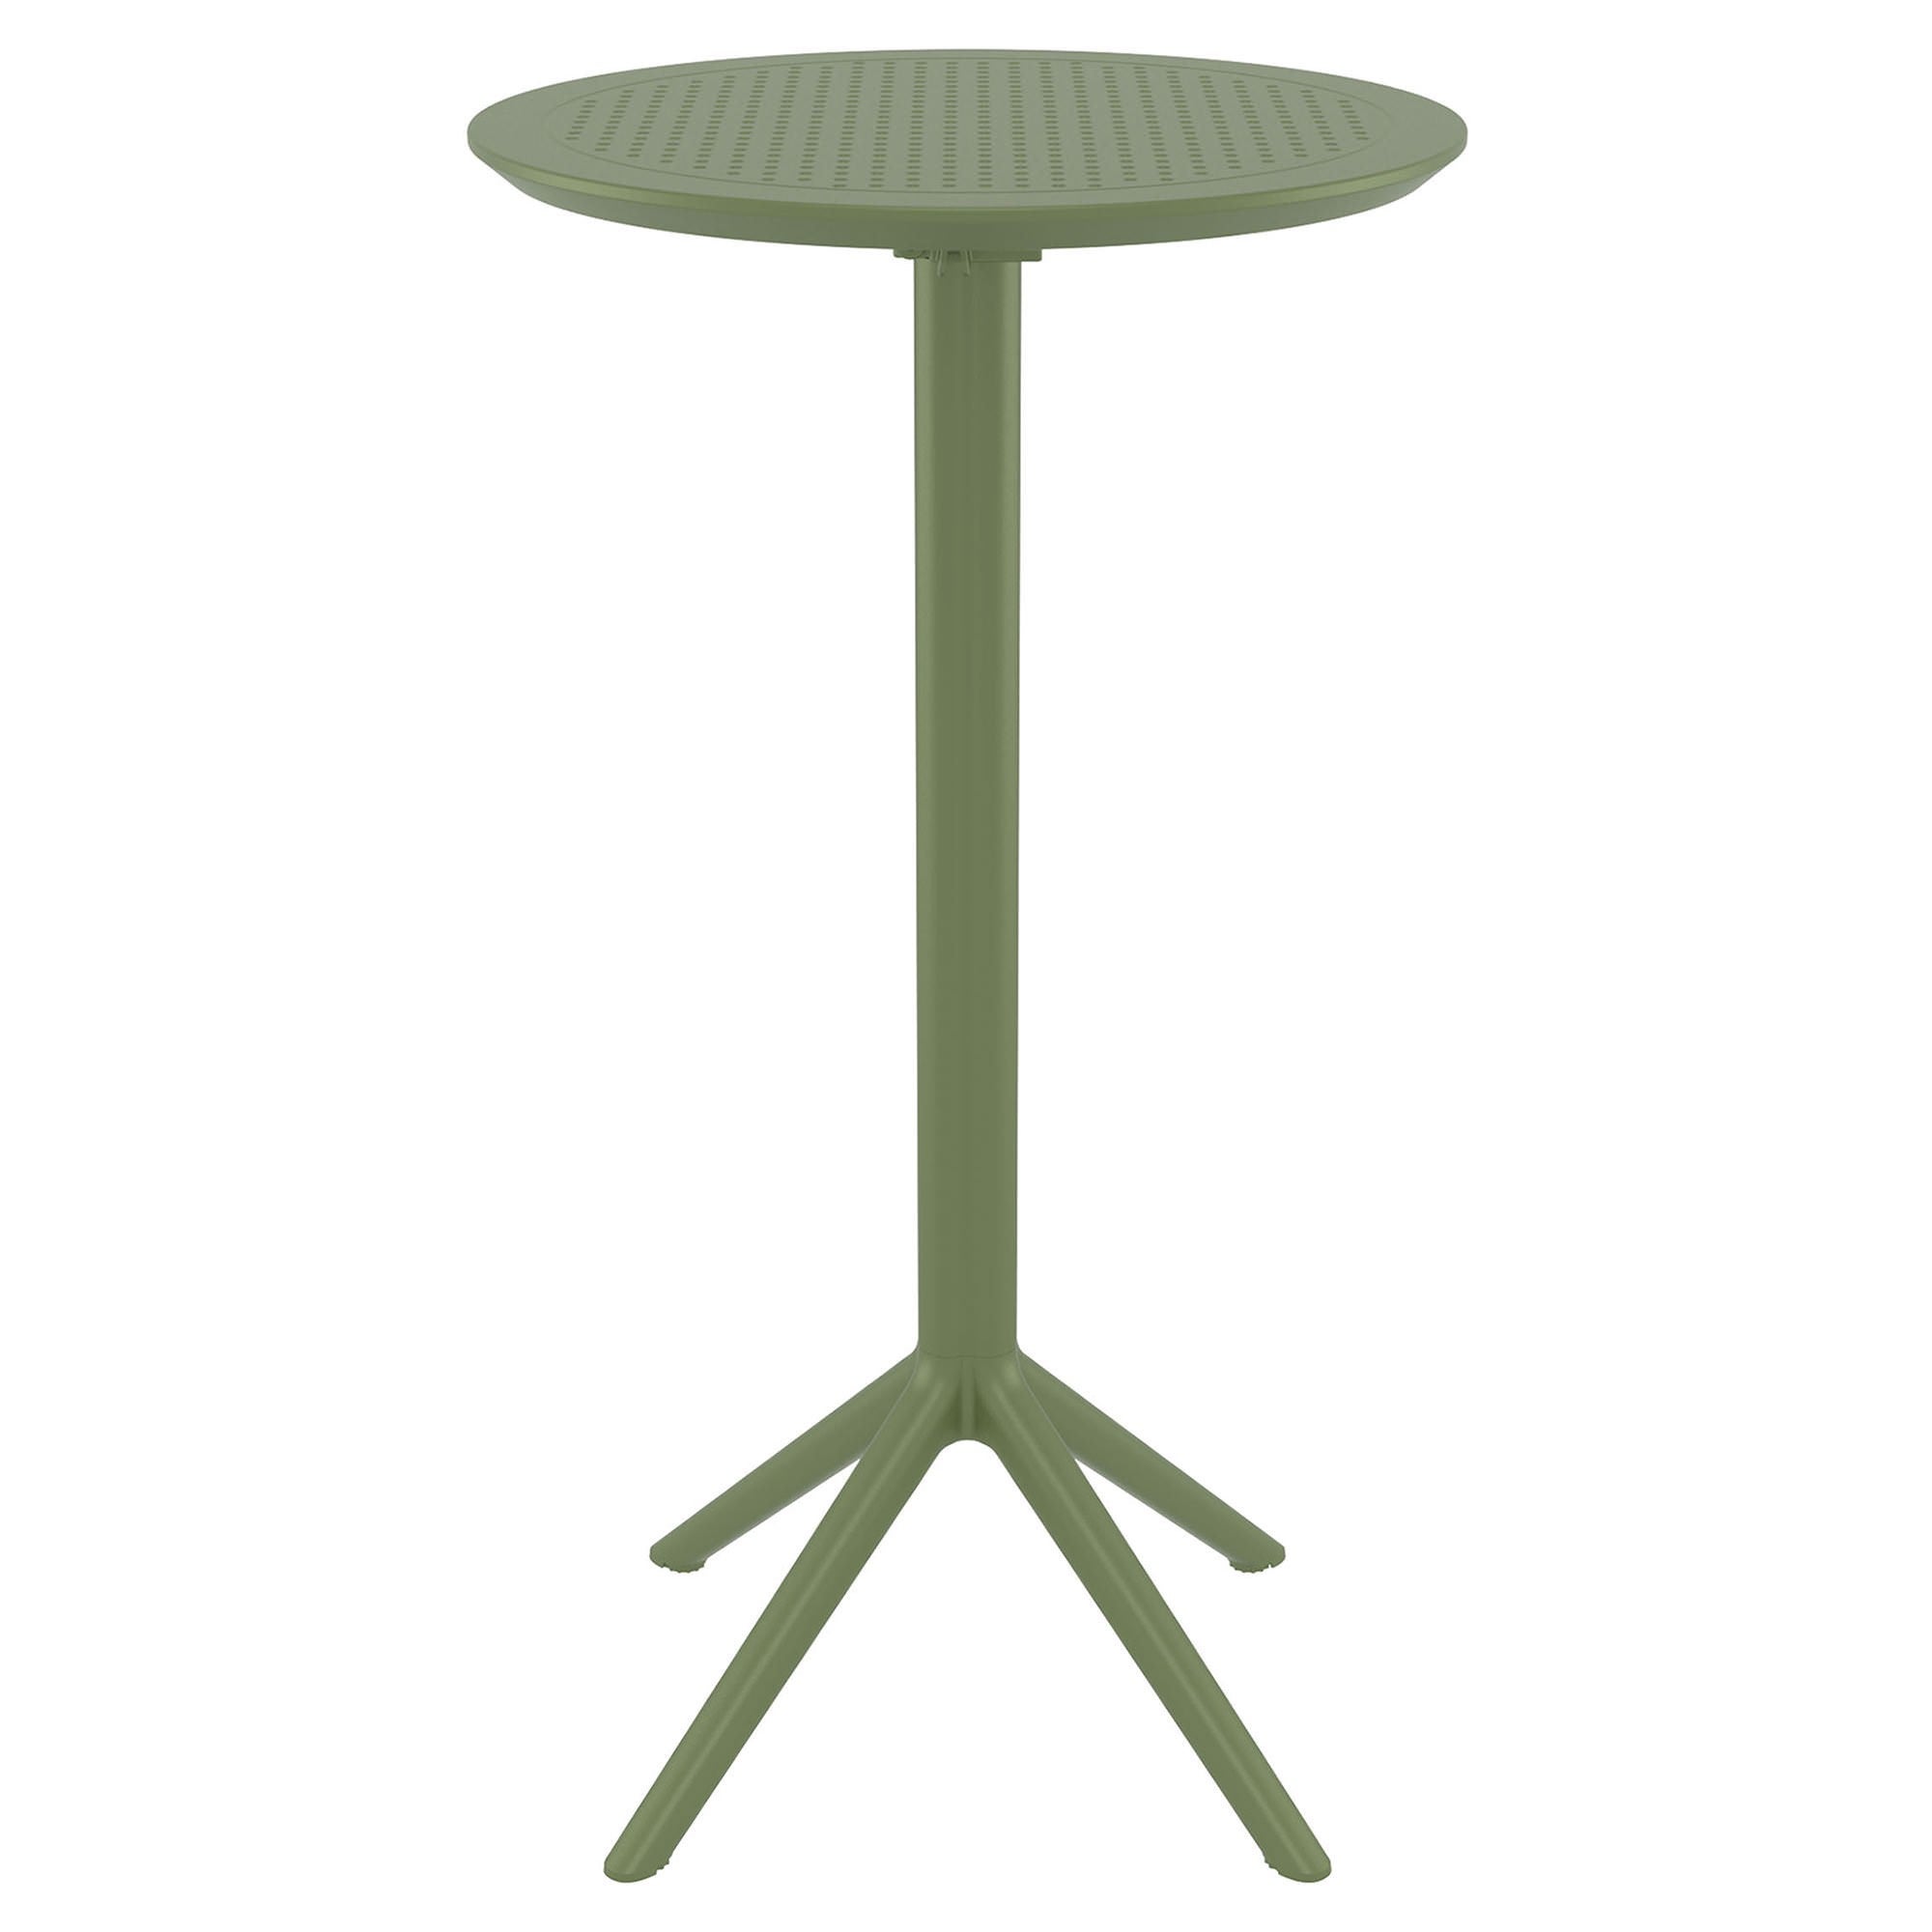 Siesta Sky Commercial Grade Indoor / Outdoor Round Folding Bar Table, 60cm, Olive Green